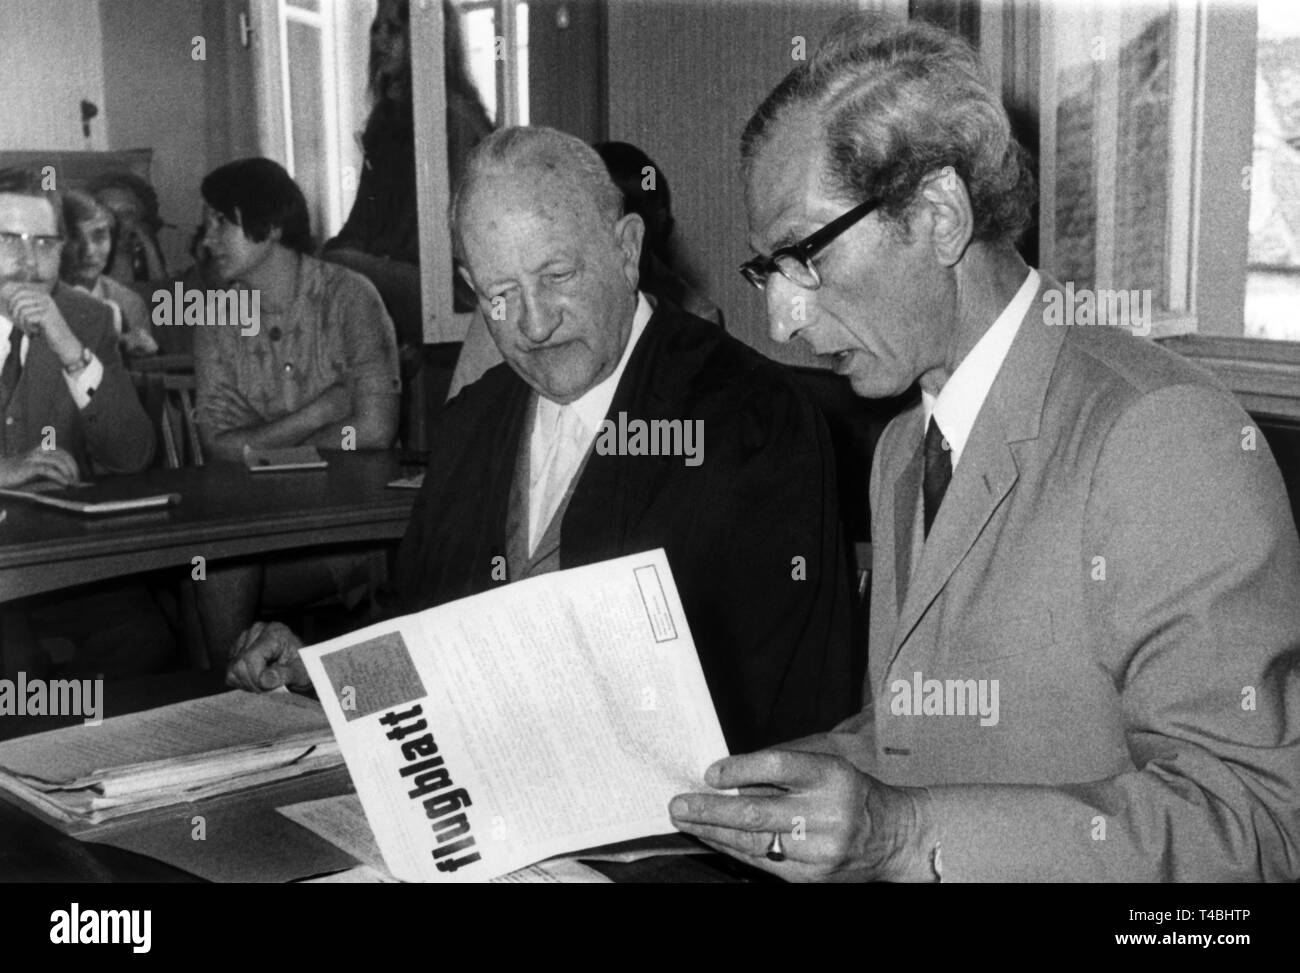 The joint plaintiff Otto von Fircks (r) talking with his lawyer Werner Lebenstedt (Hannover) in the magistrates' court of Burgdorf on 19 May 1971 with the aforesaid flyer. The legal proceedings ended with a acquittal of the accused. The Baltic baron and CDU Member of the Bundestag Otto Freiherr von Fircks (59) from Isernhagen (district Burgdorf) wanted the 40-year-old teacher to be convicted for defamation. The politically committed defendant has claimed in flyers that the Christian Democrat would have been involved in 'narcissictic atrocities during the occupation of Poland' and would have 'c Stock Photo